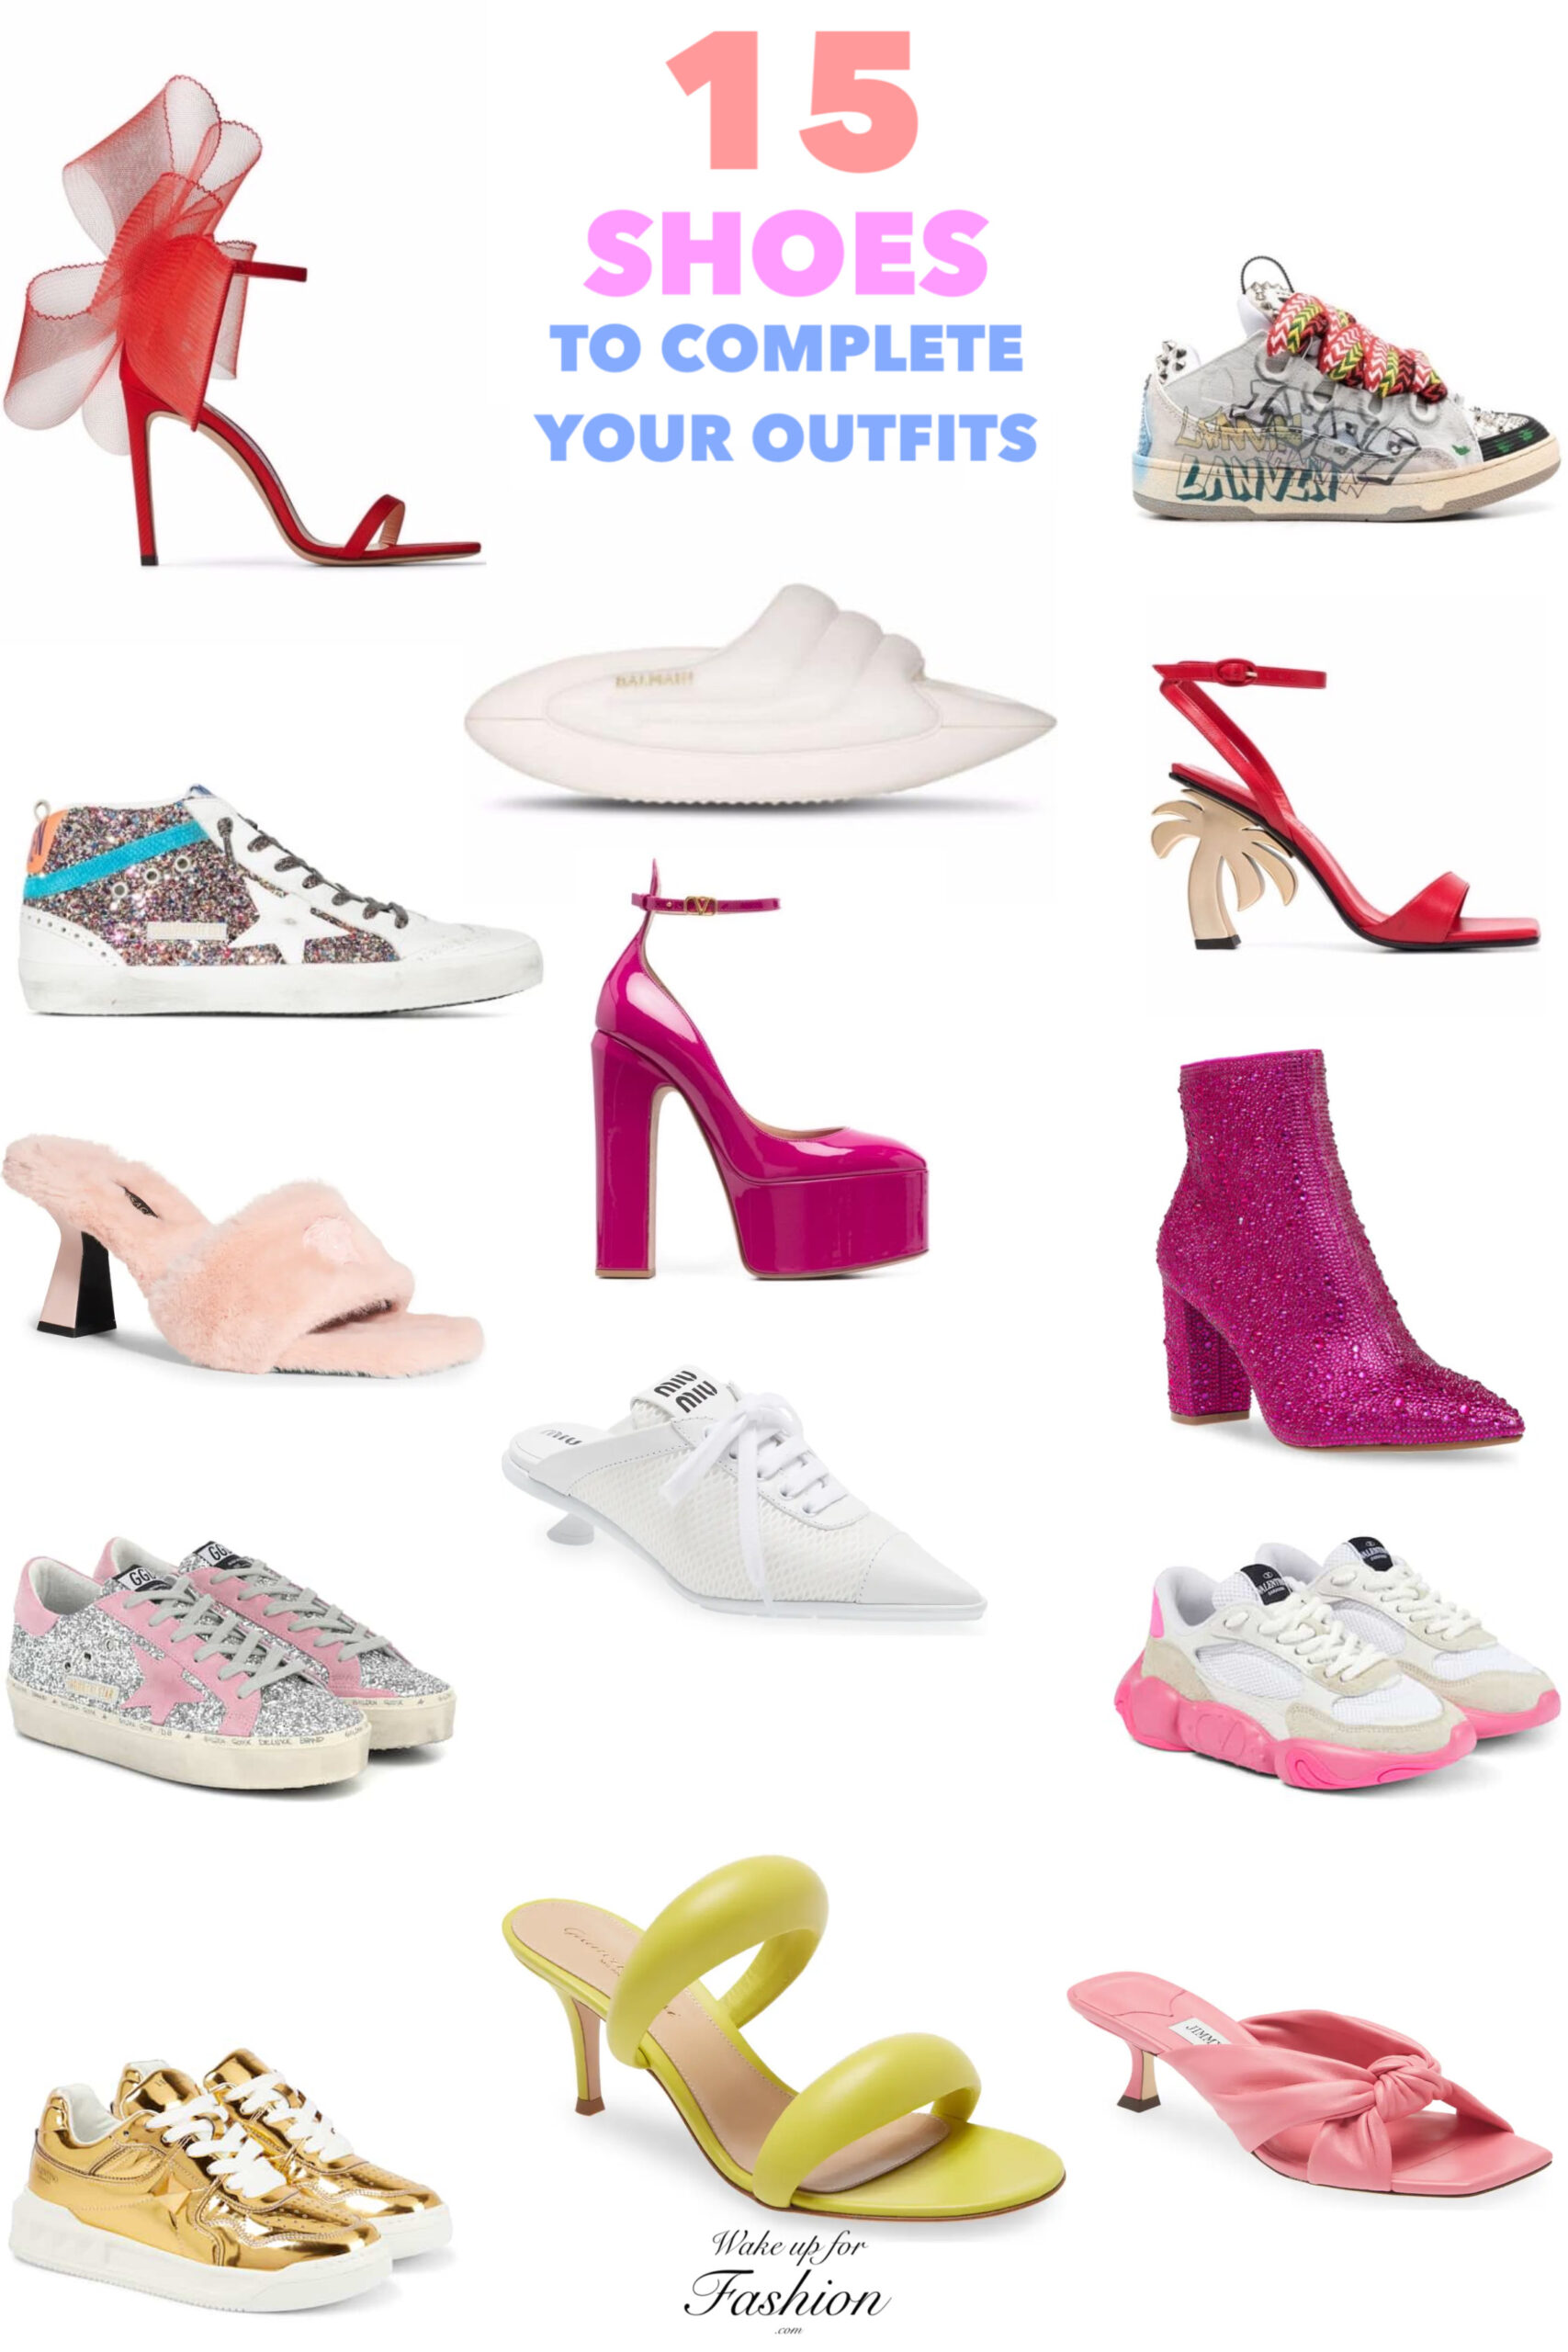 Heels & Trainers To Complete Your Outfits